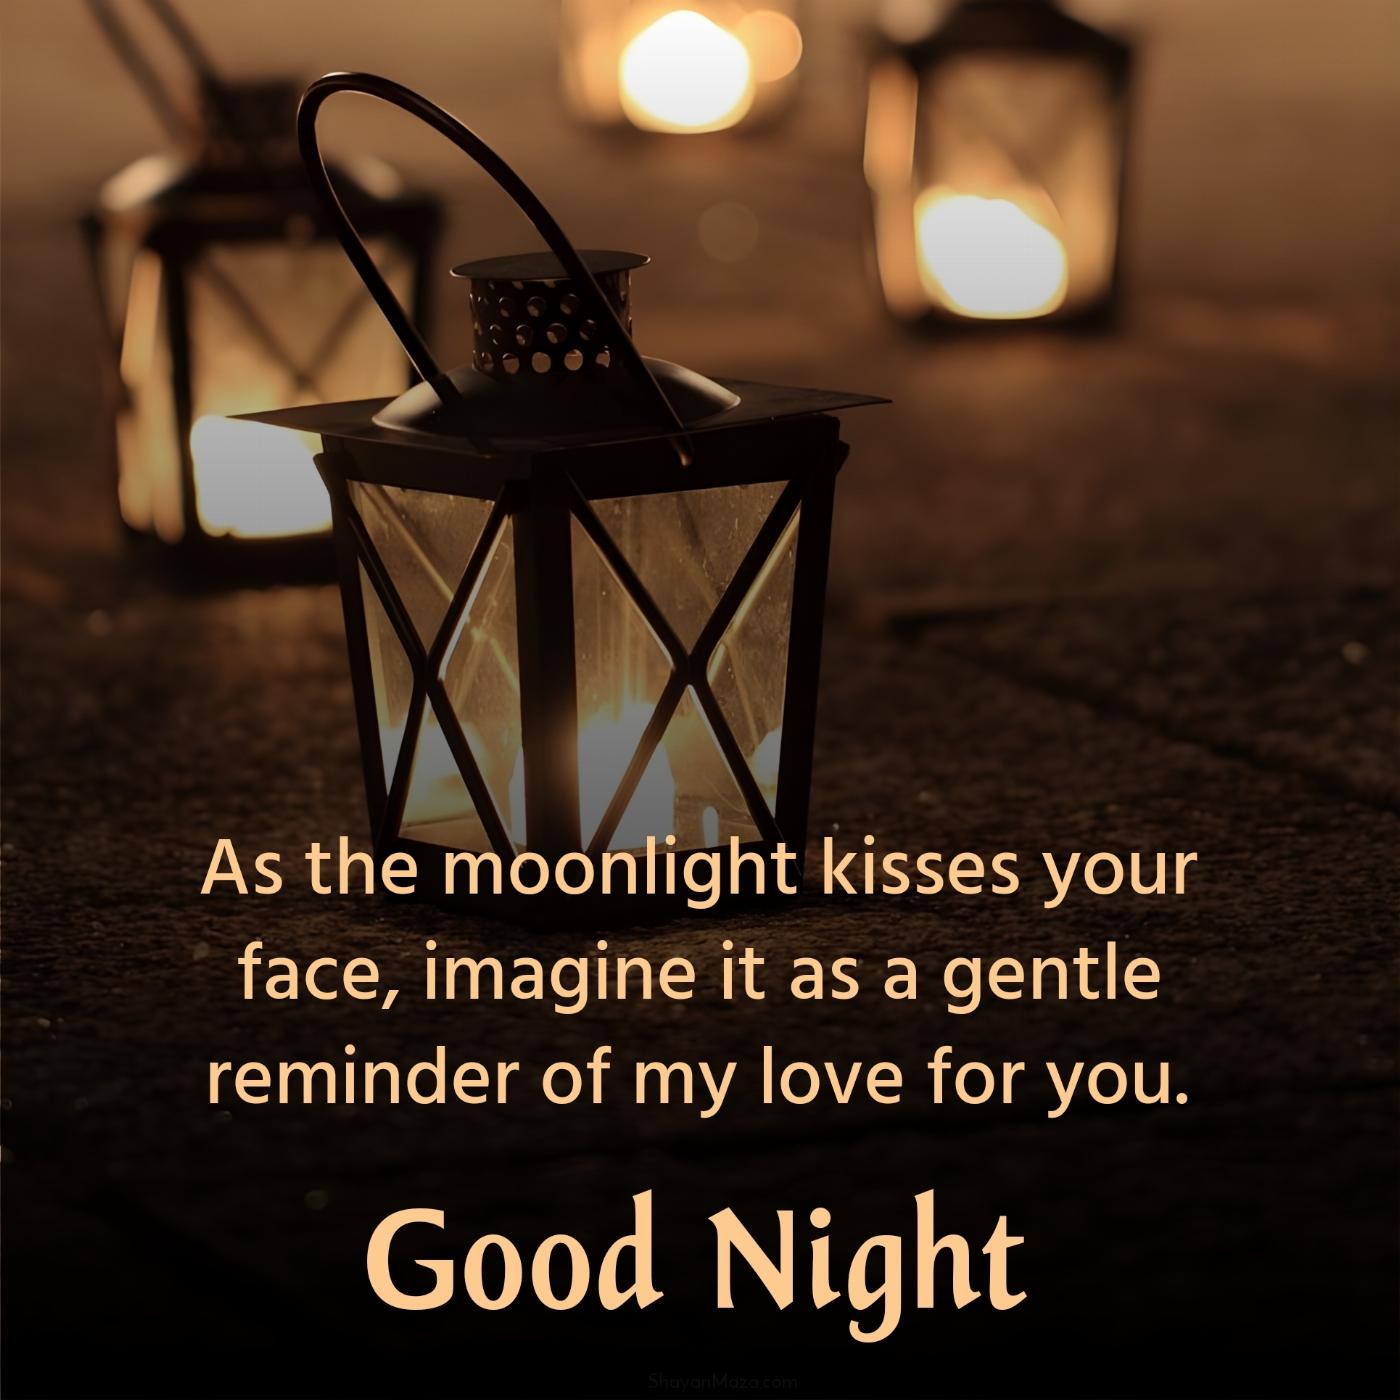 As the moonlight kisses your face imagine it as a gentle reminder